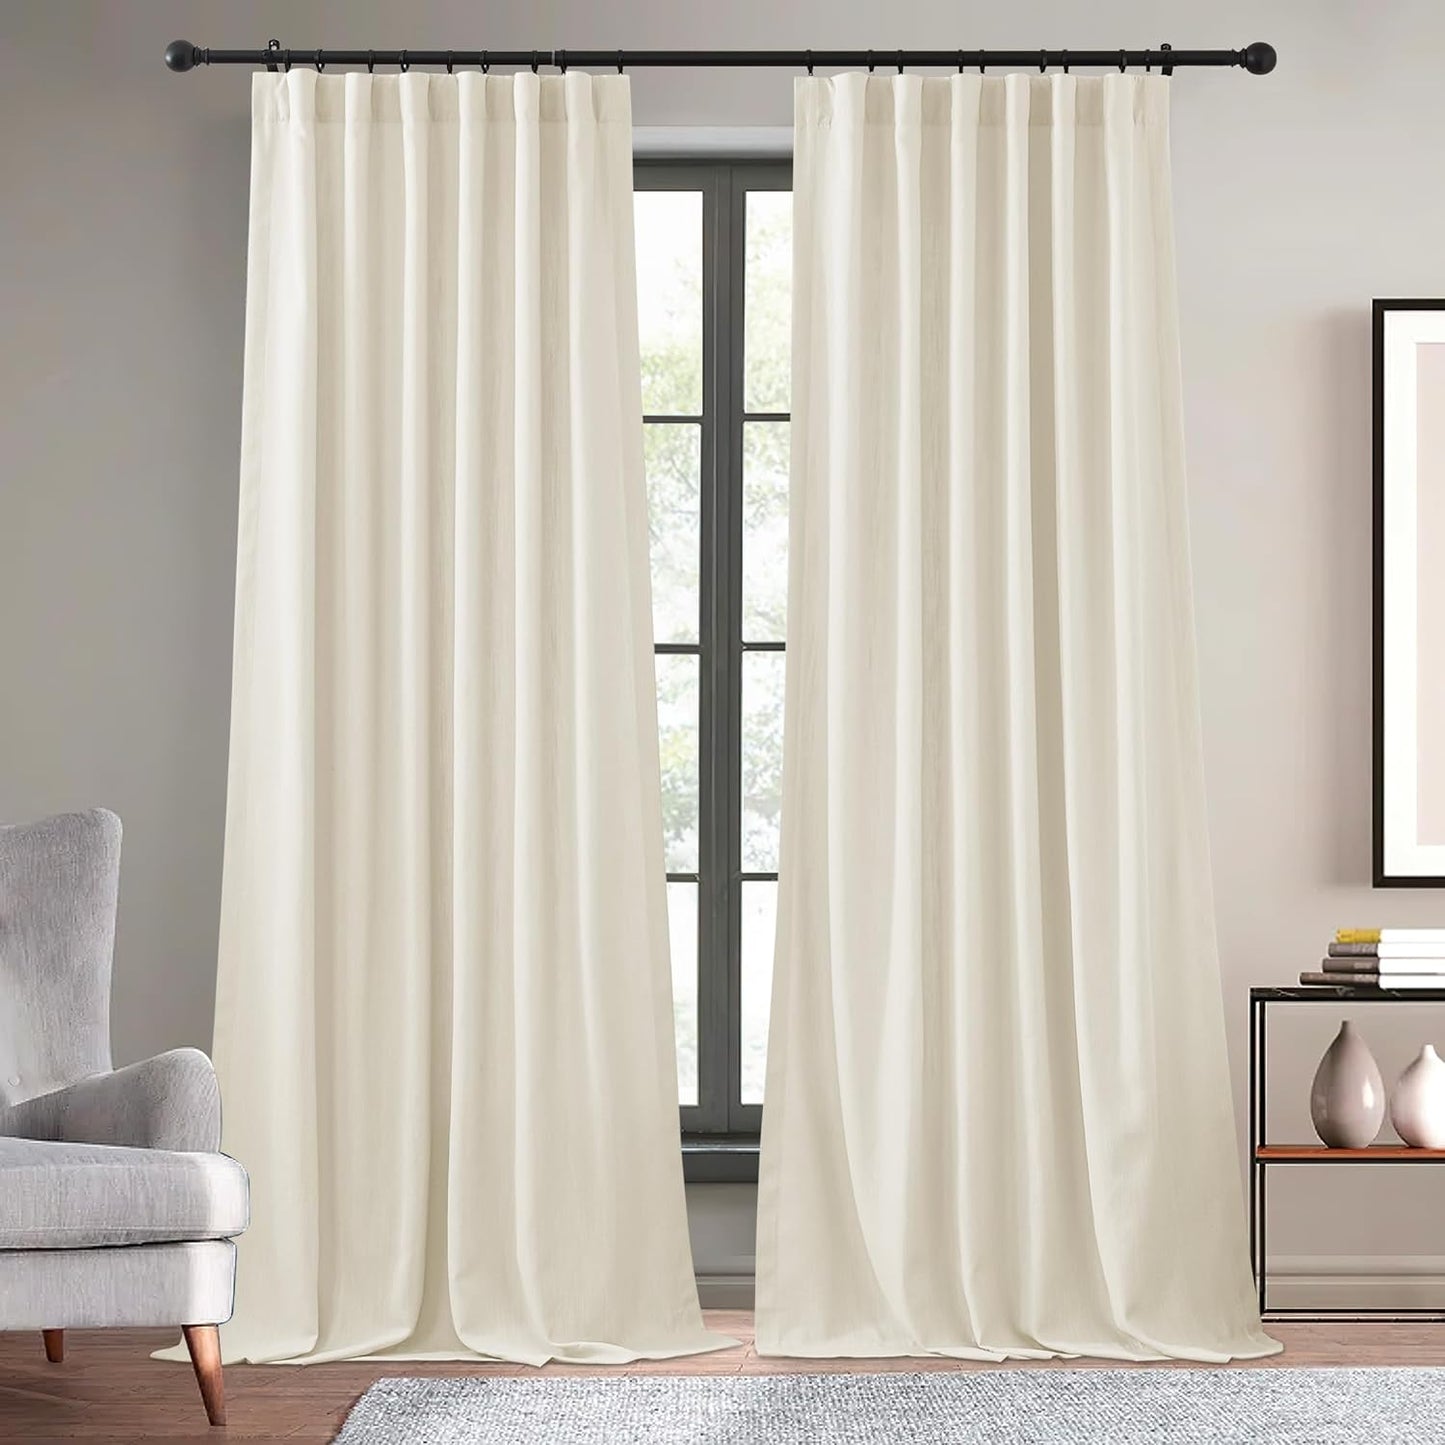 KGORGE Thick Faux Linen Weave Textured Curtains for Bedroom Light Filtering Semi Sheer Curtains Farmhouse Decor Pinch Pleated Window Drapes for Living Room, Linen, W 52" X L 96", 2 Pcs  KGORGE Linen W 52 X L 120 | Pair 